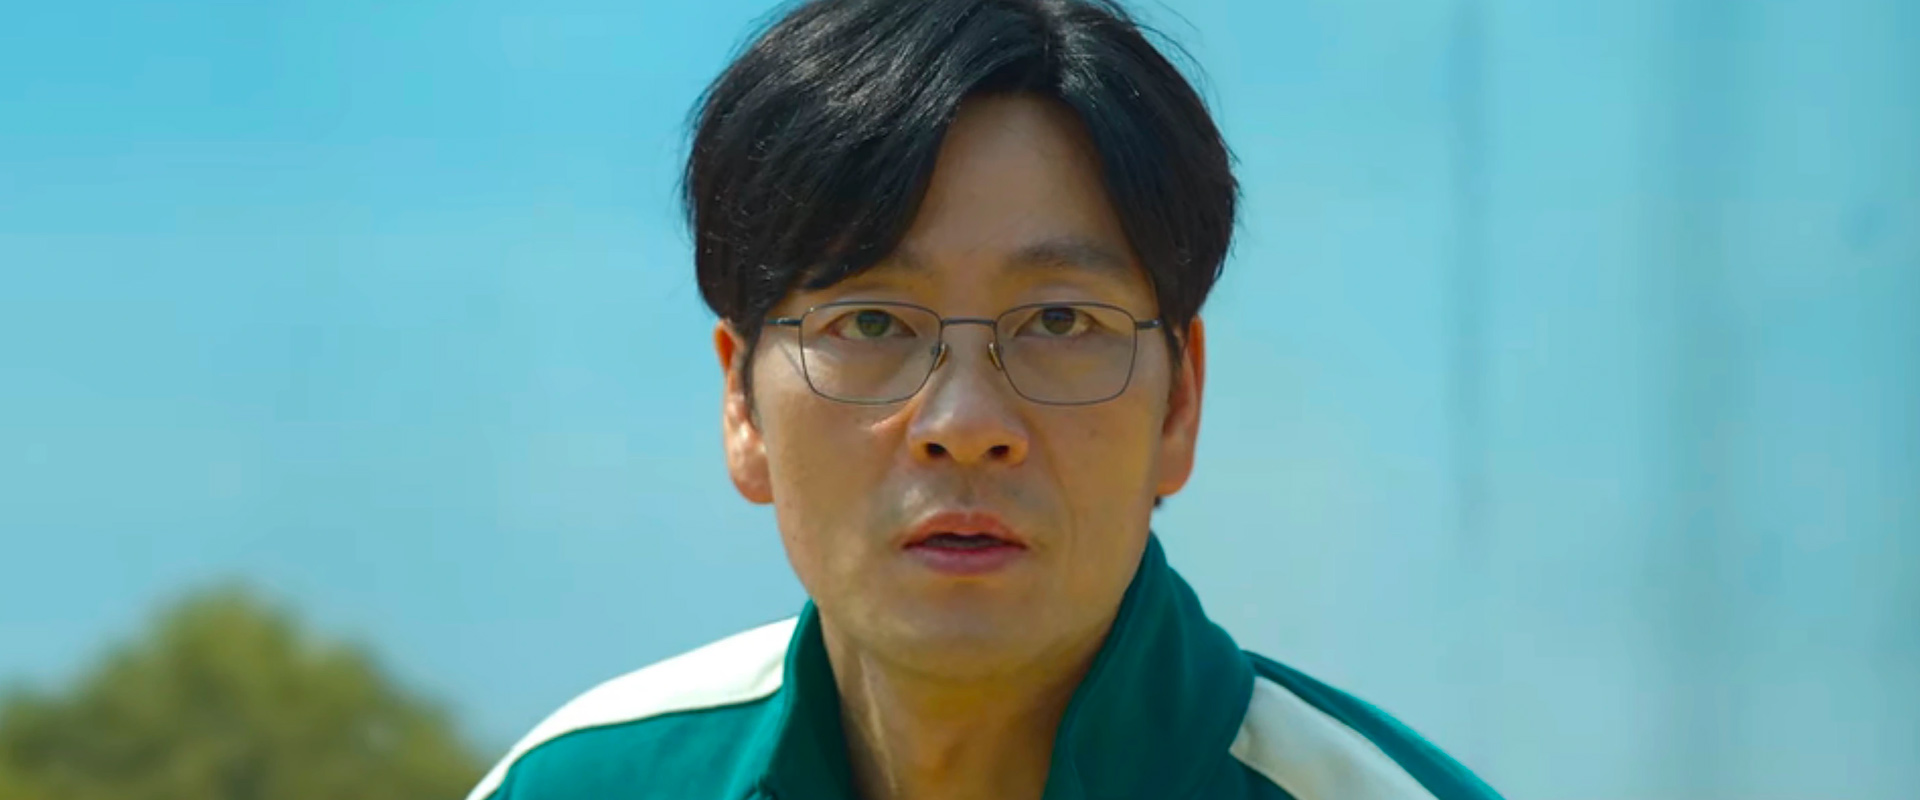 Squid Game: the full cast of the Korean Netflix series - Pledge Times